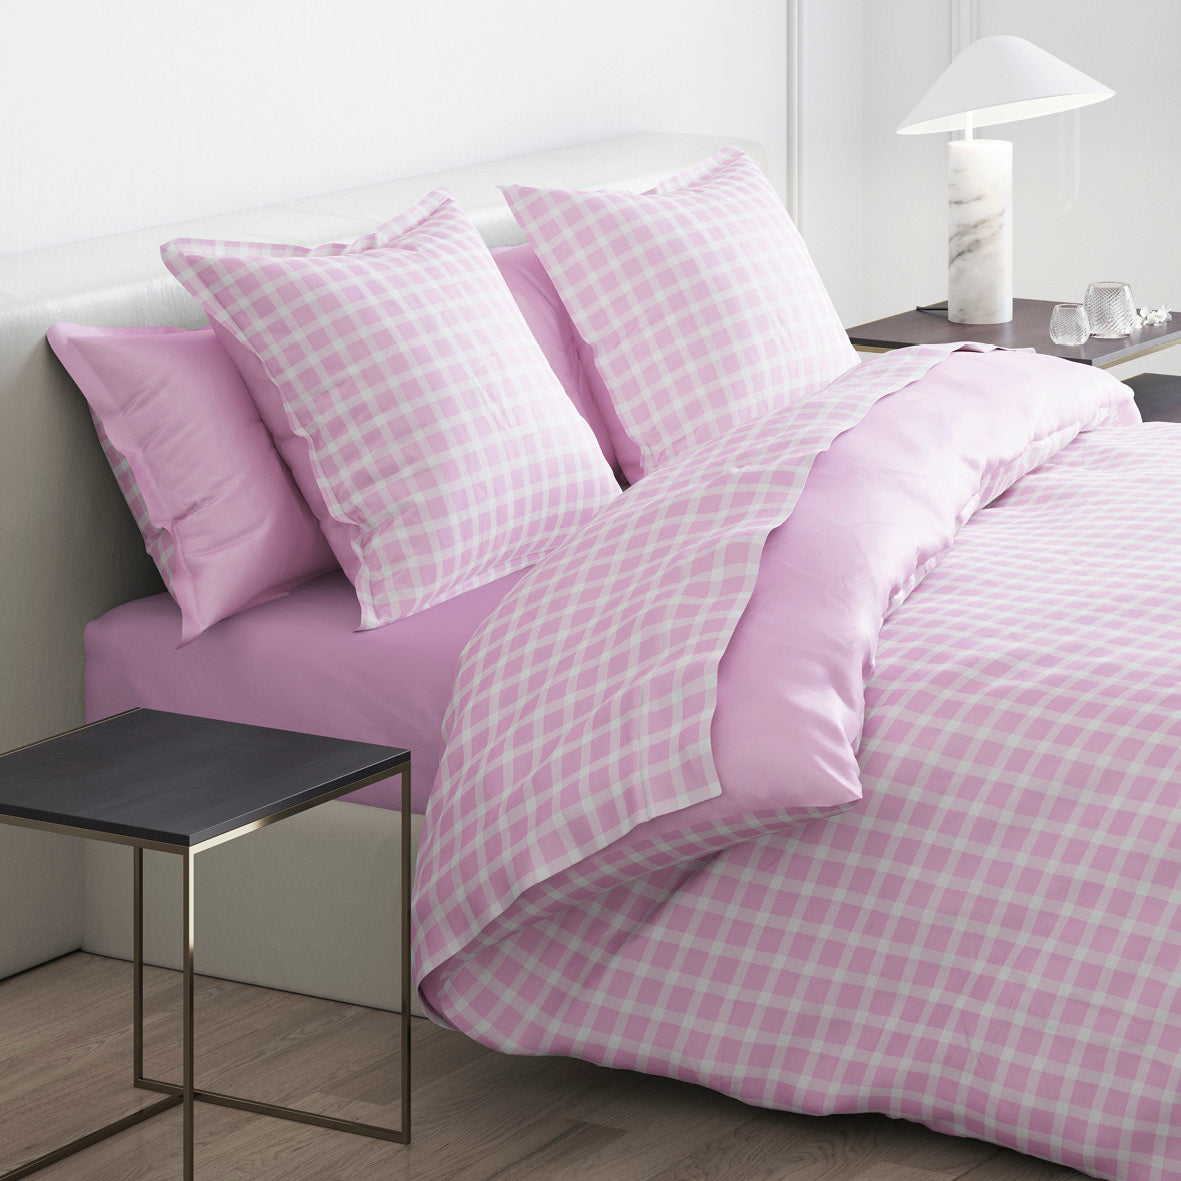 Fitted sheet in cotton satin - Uni pink